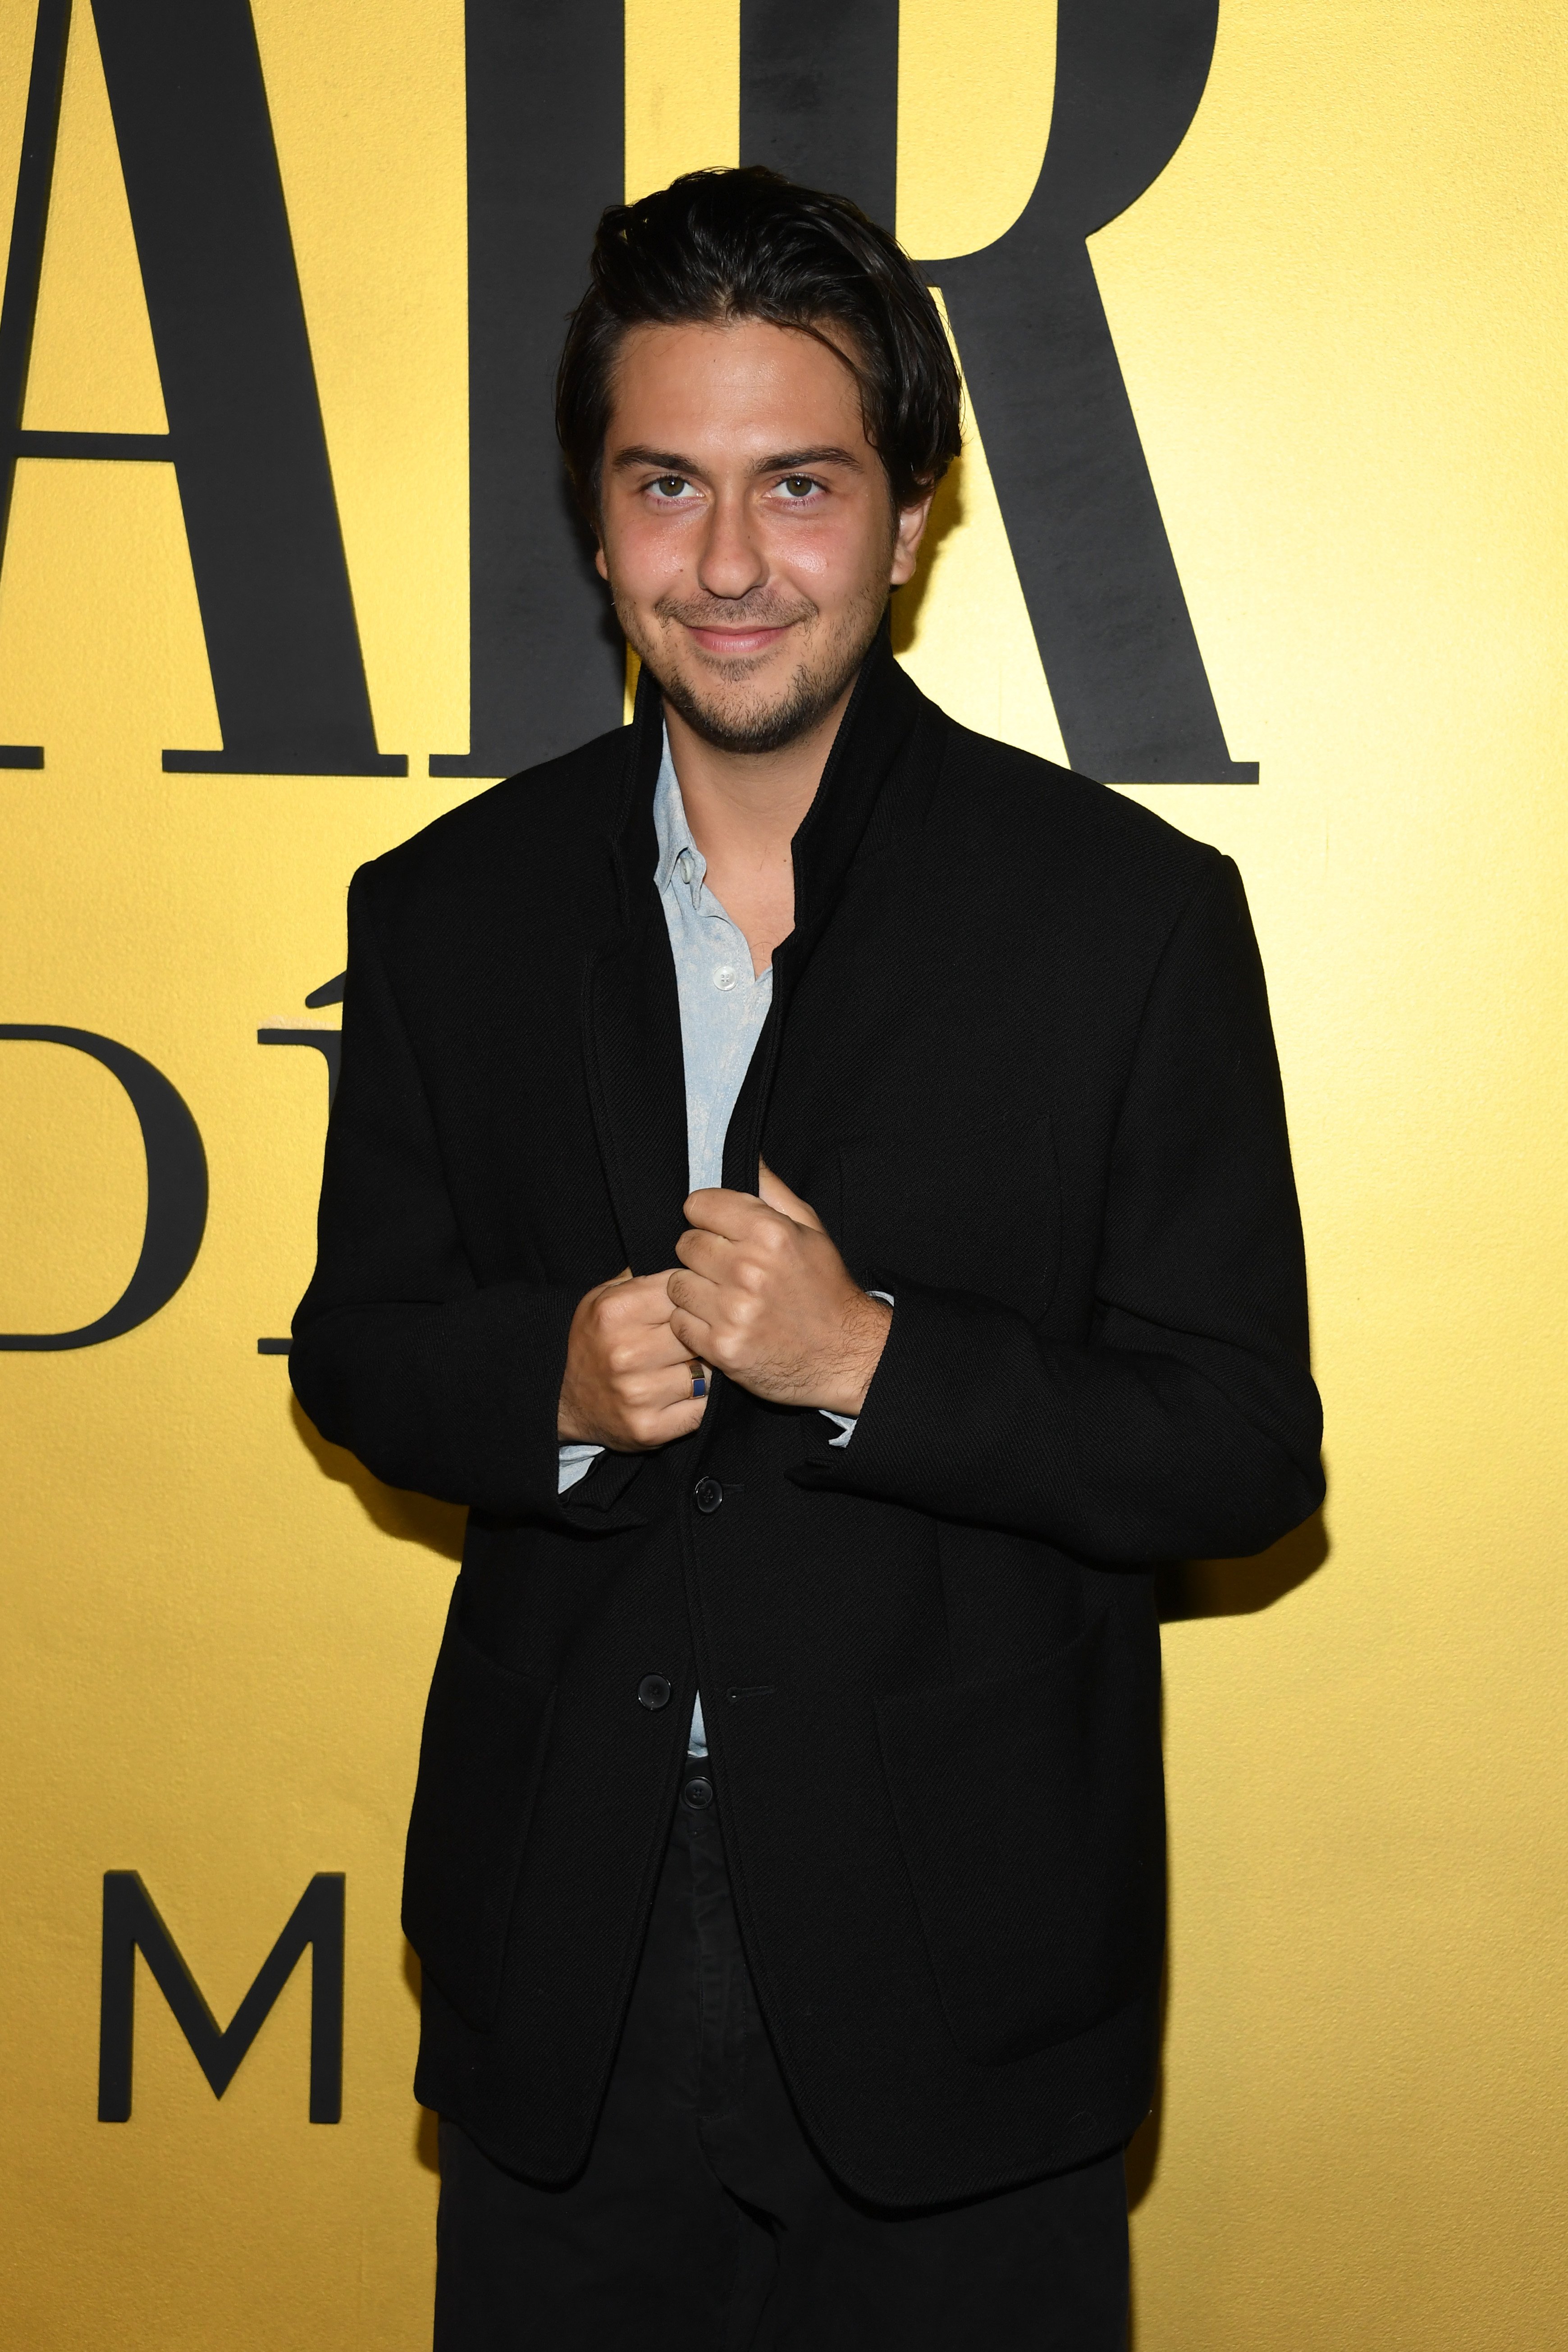 Nat Wolff at Vanity Fair's A Night For Young Hollywood party on March 22, 2022, in California. | Source: Getty Images